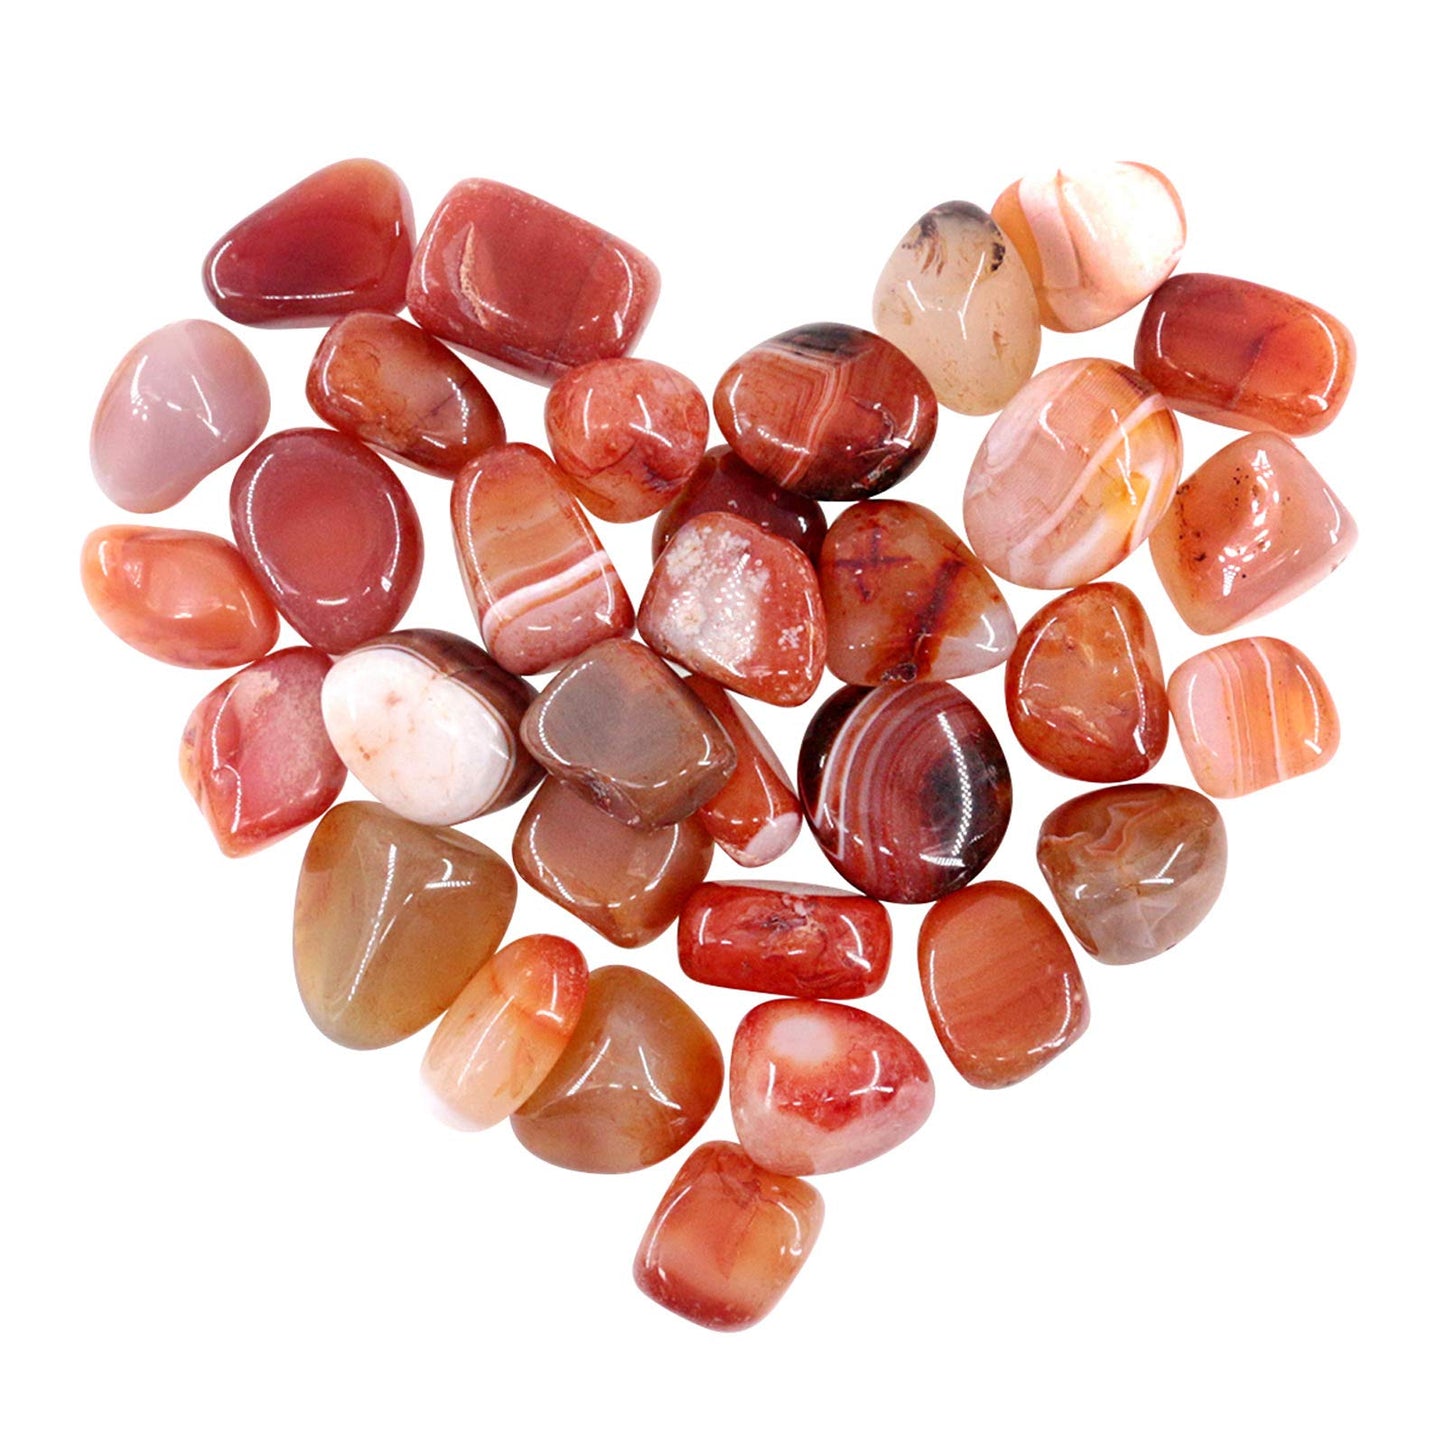 Red Agate Tumbled Stone - Banded Red Crystal - 1 Inch